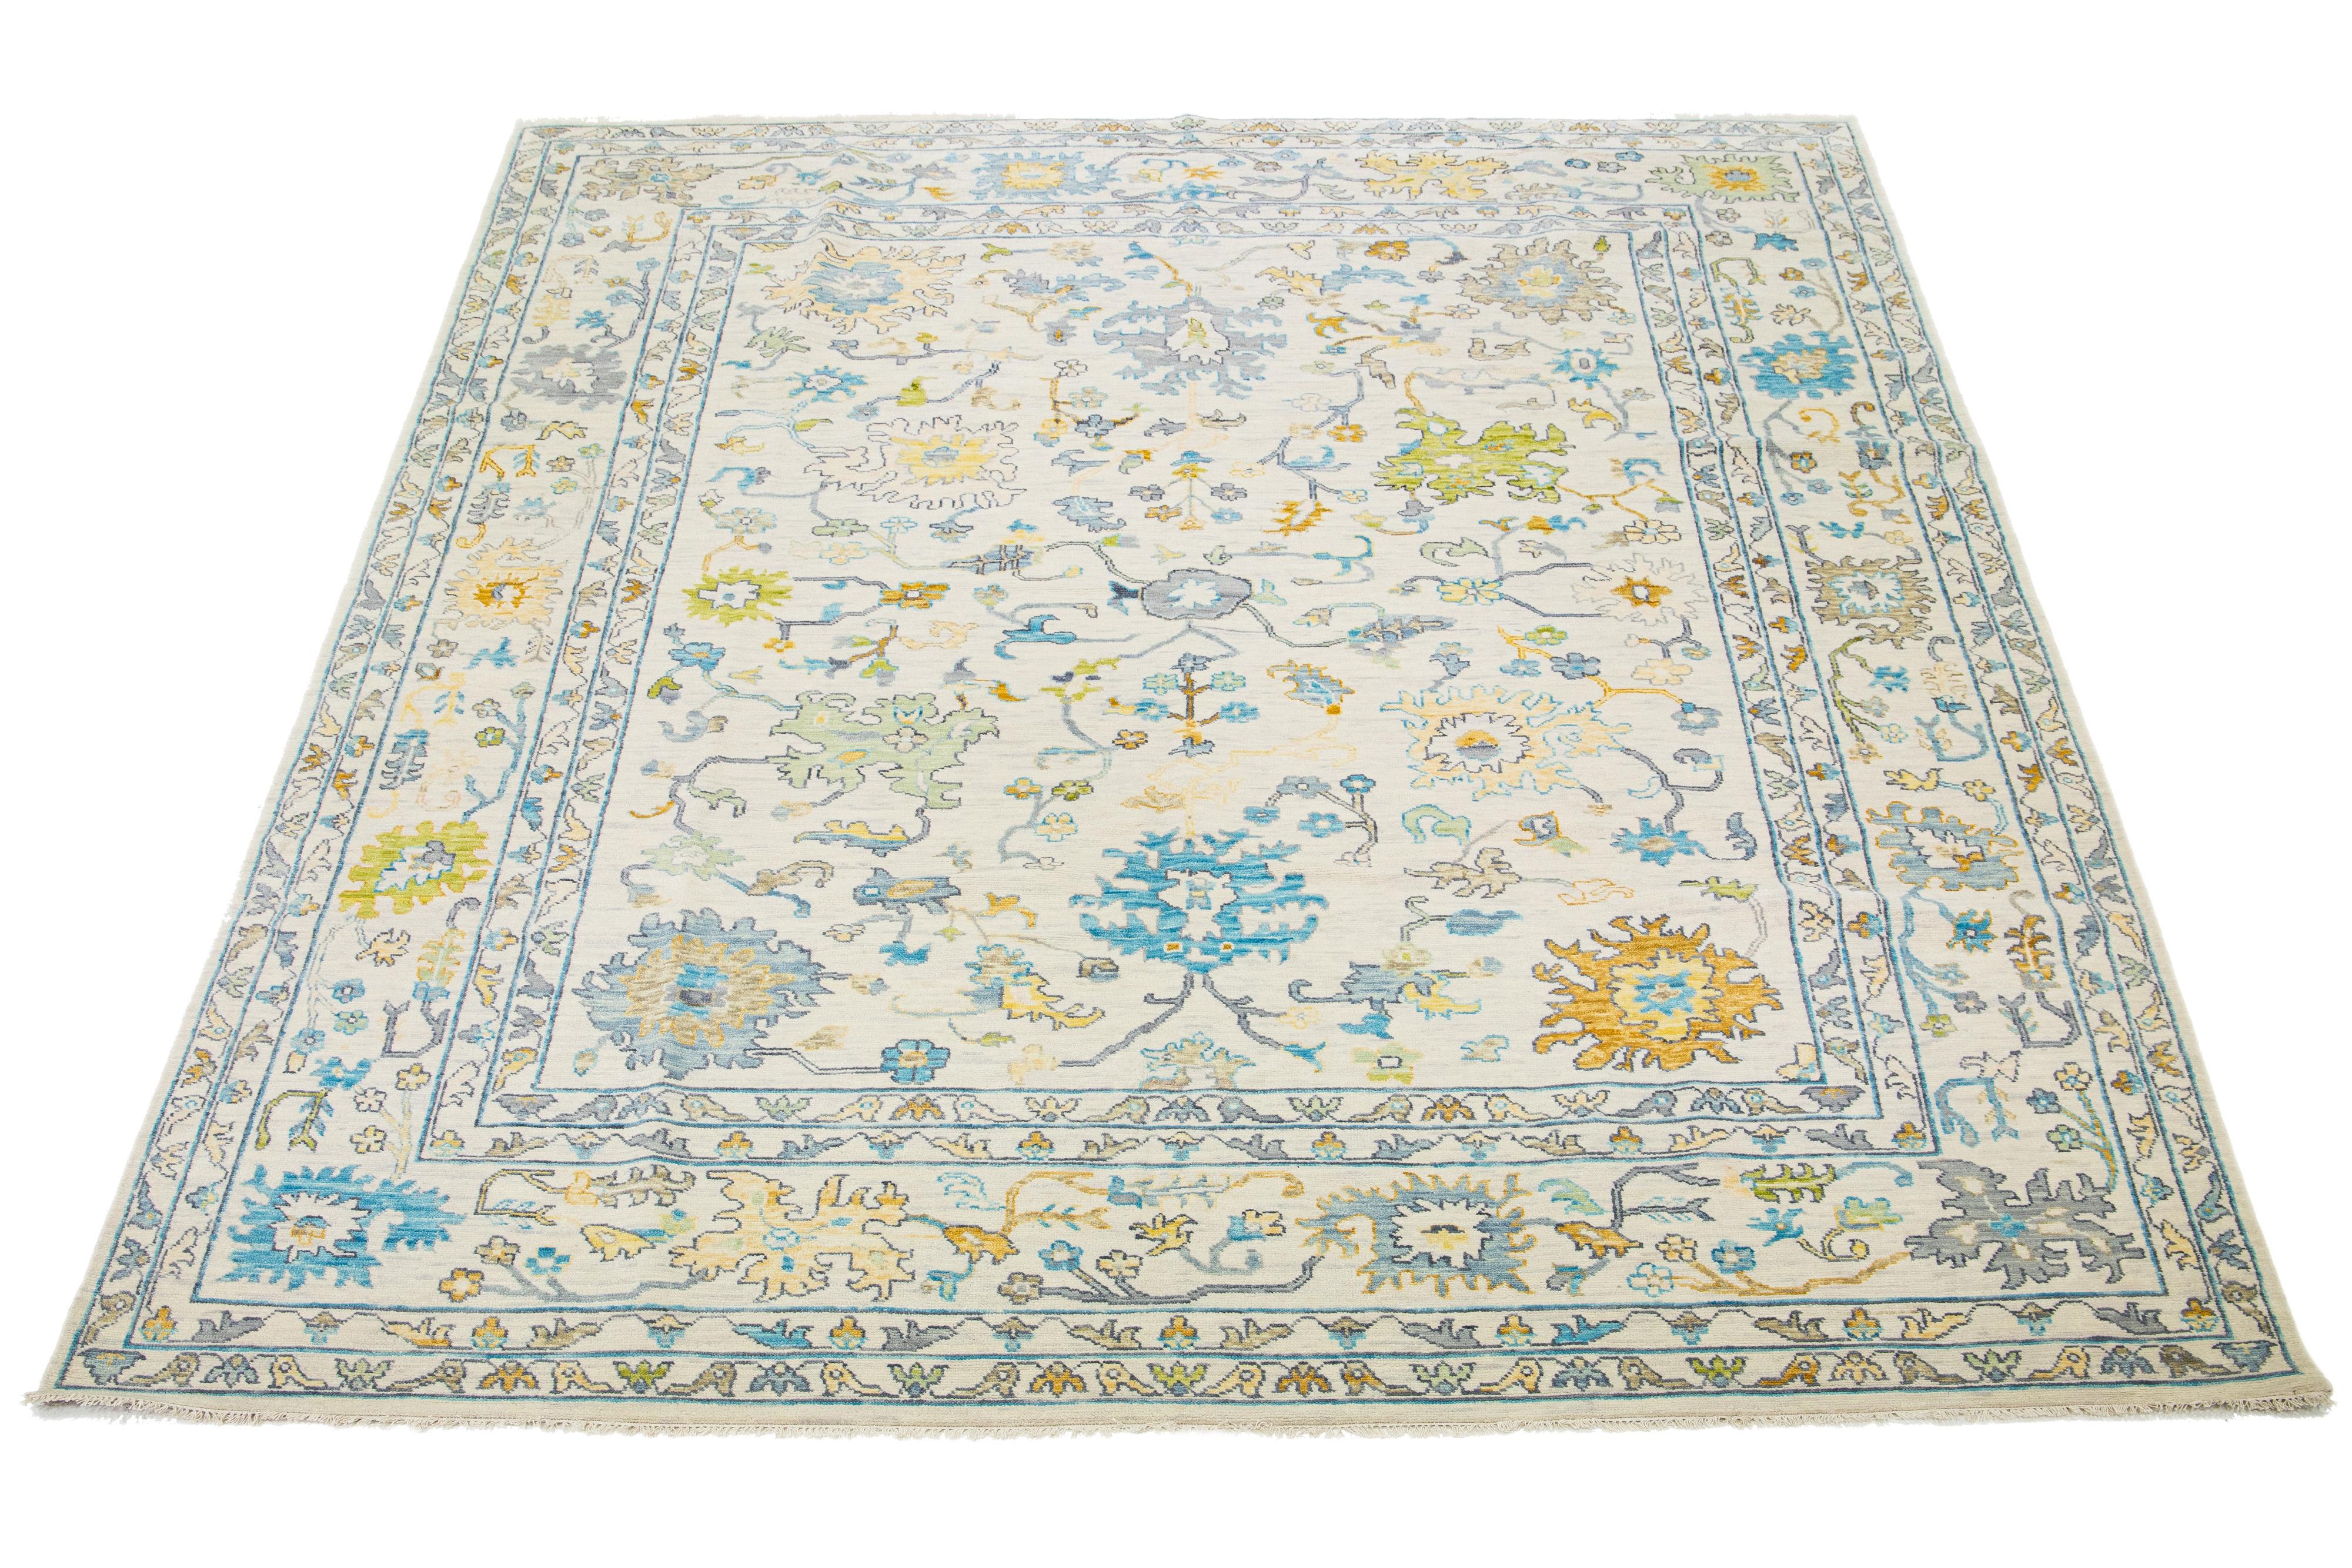 This wool rug, designed in the Oushak style, showcases a hand-knotted beige field. It exudes a contemporary aesthetic through its all-over multicolored floral design.

This rug measures 12'3